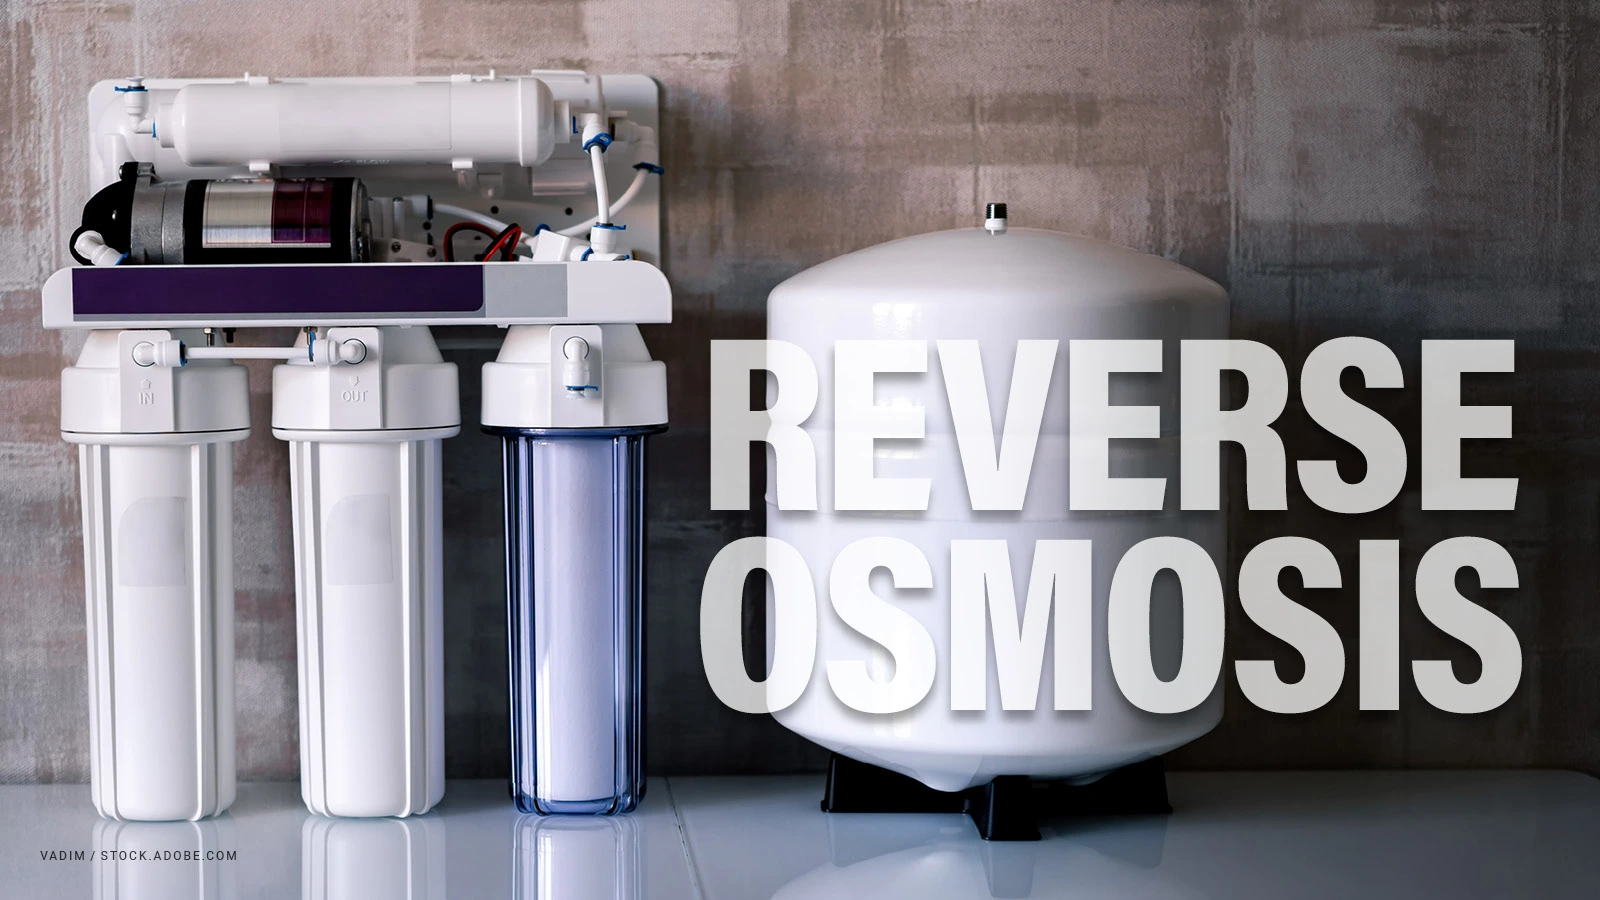 Does Reverse Osmosis Remove Fluoride